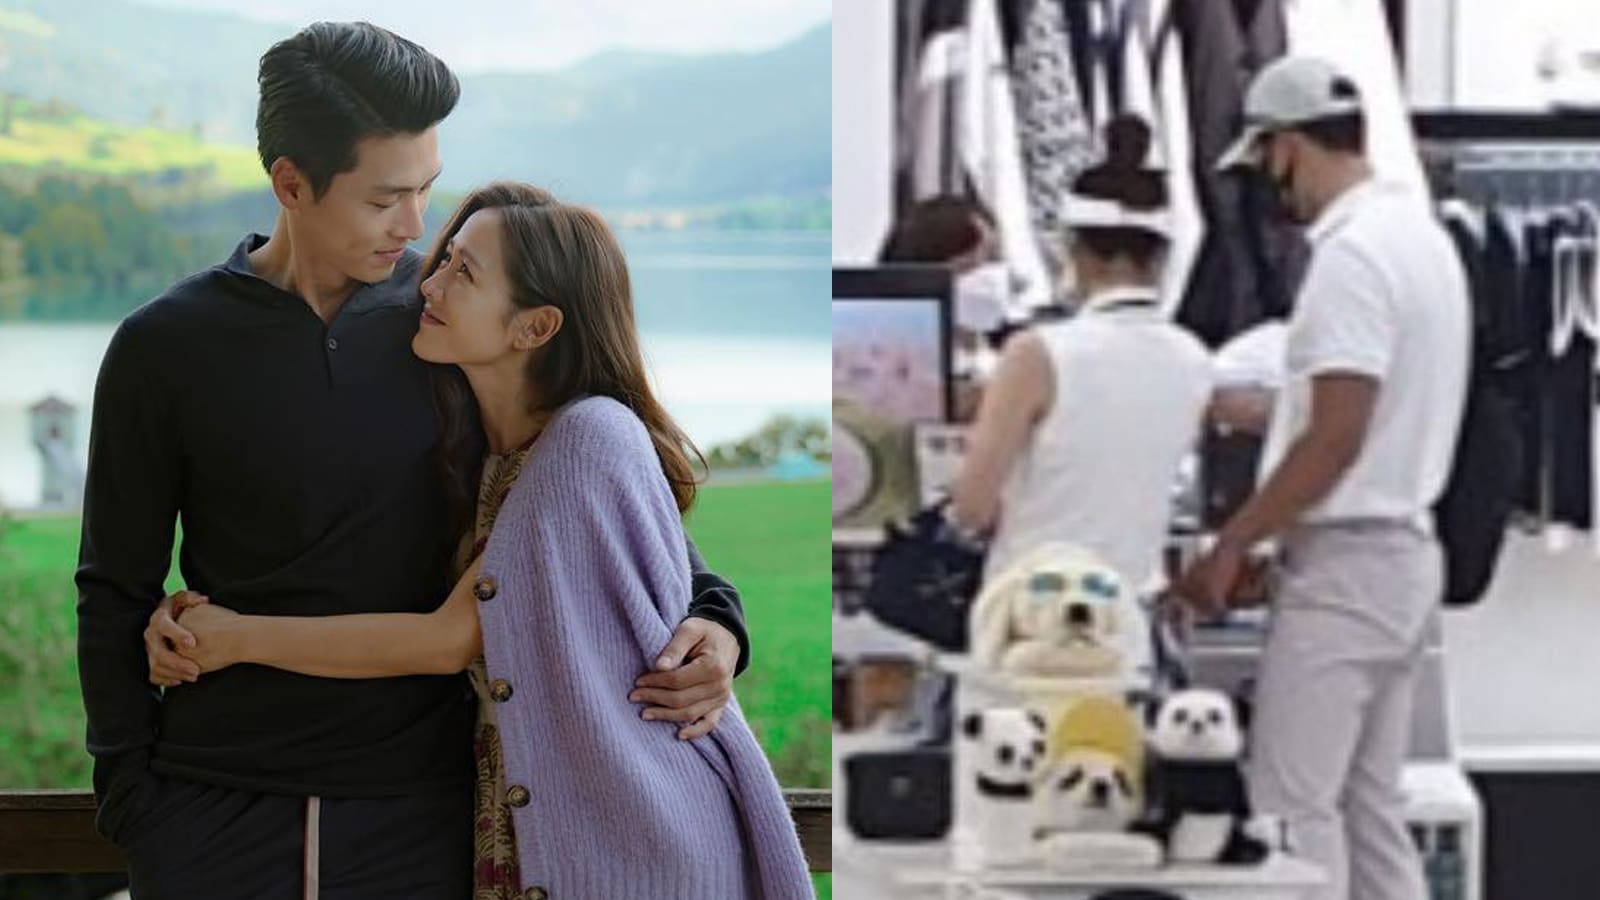 Hyun Bin & Son Ye Jin Spotted Wearing Matching Outfits While On A Date